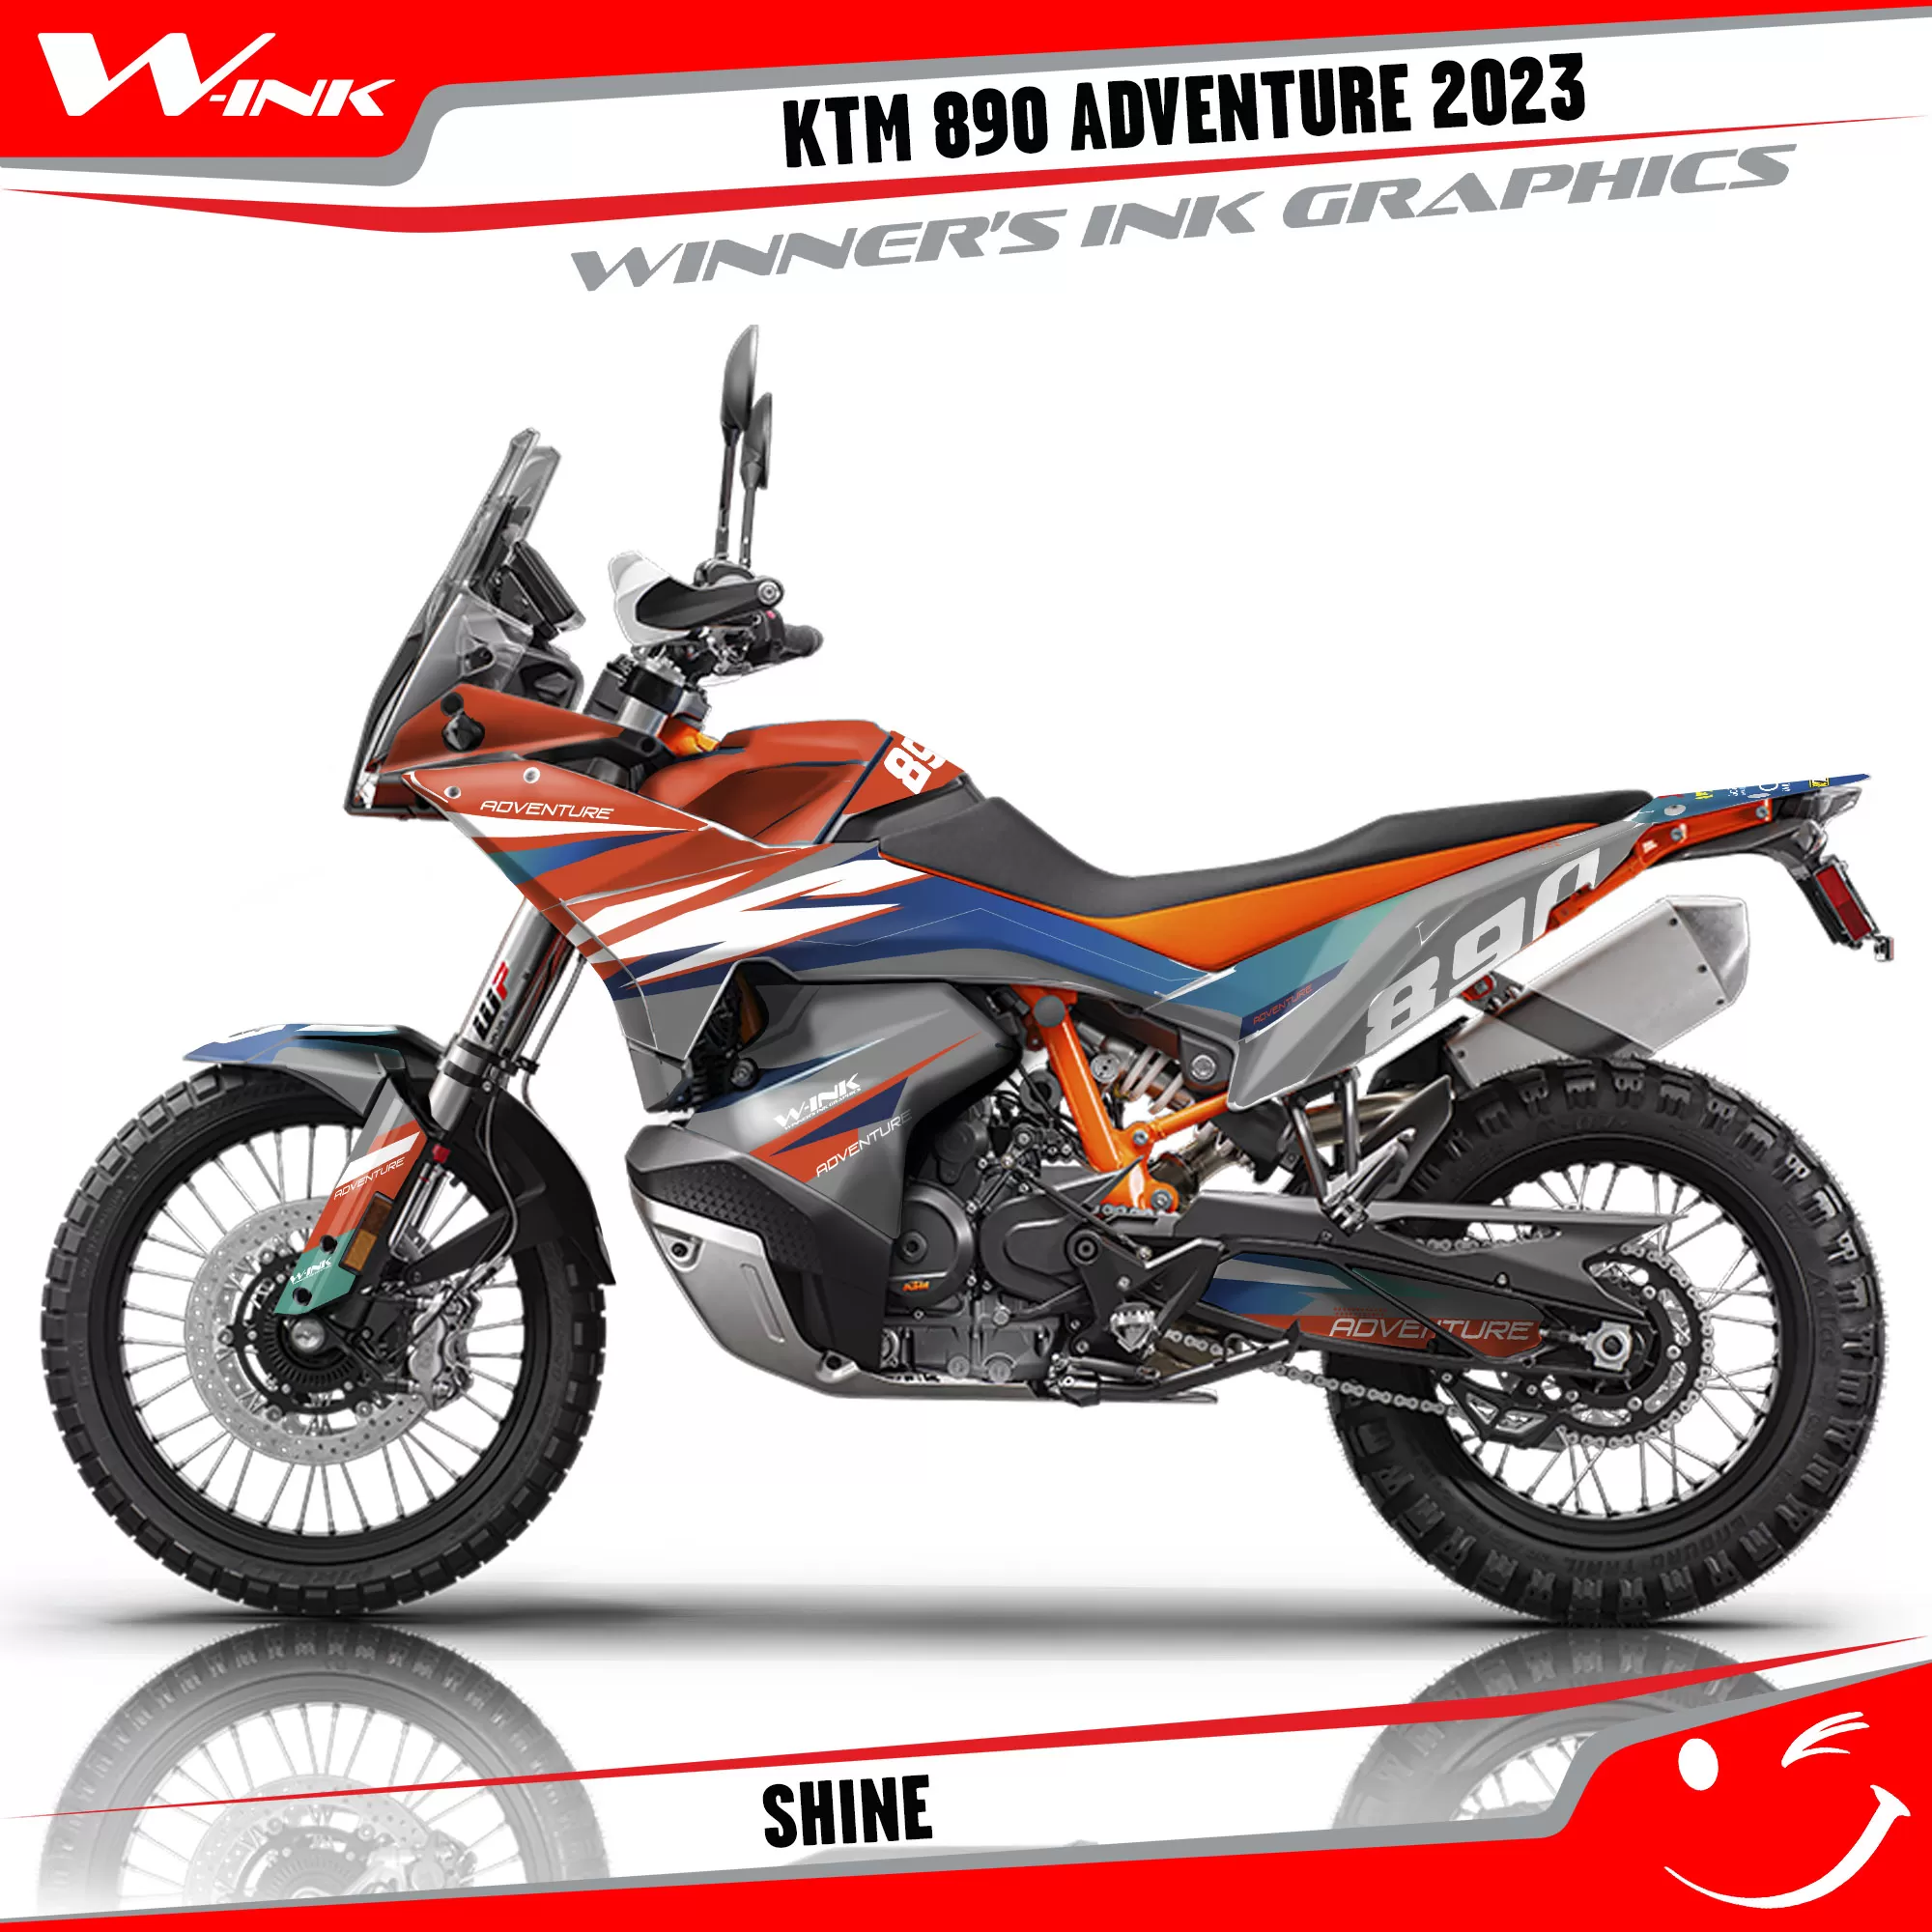 Adventure-890-2023-graphics-kit-and-decals-with-design-Shine